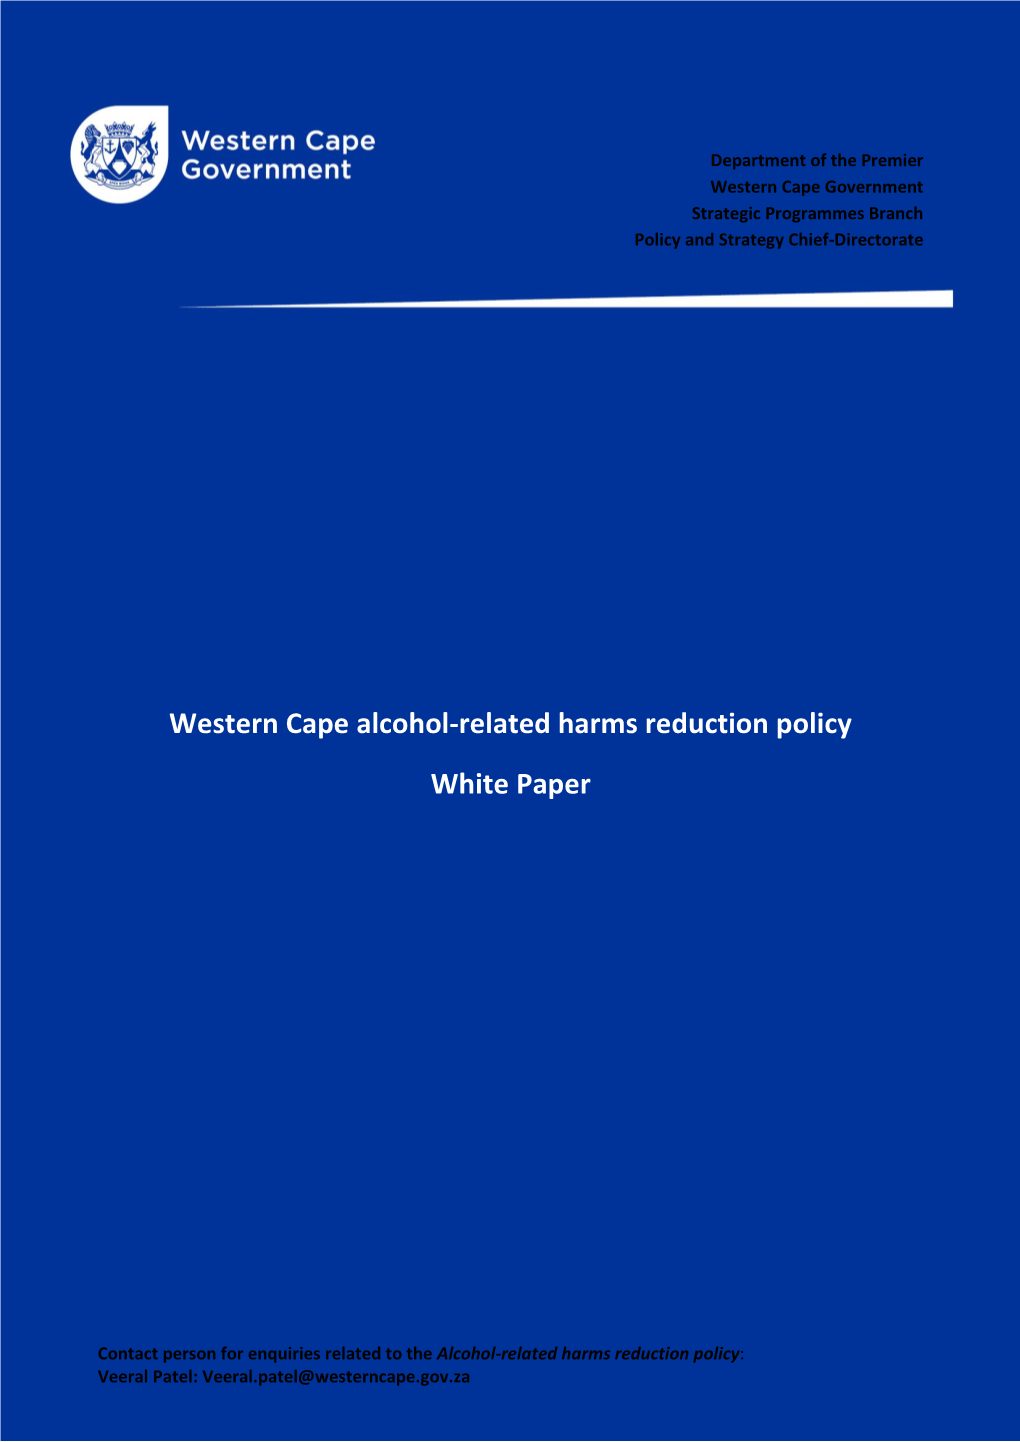 Alcohol-Related Harms Reduction Policy White Paper